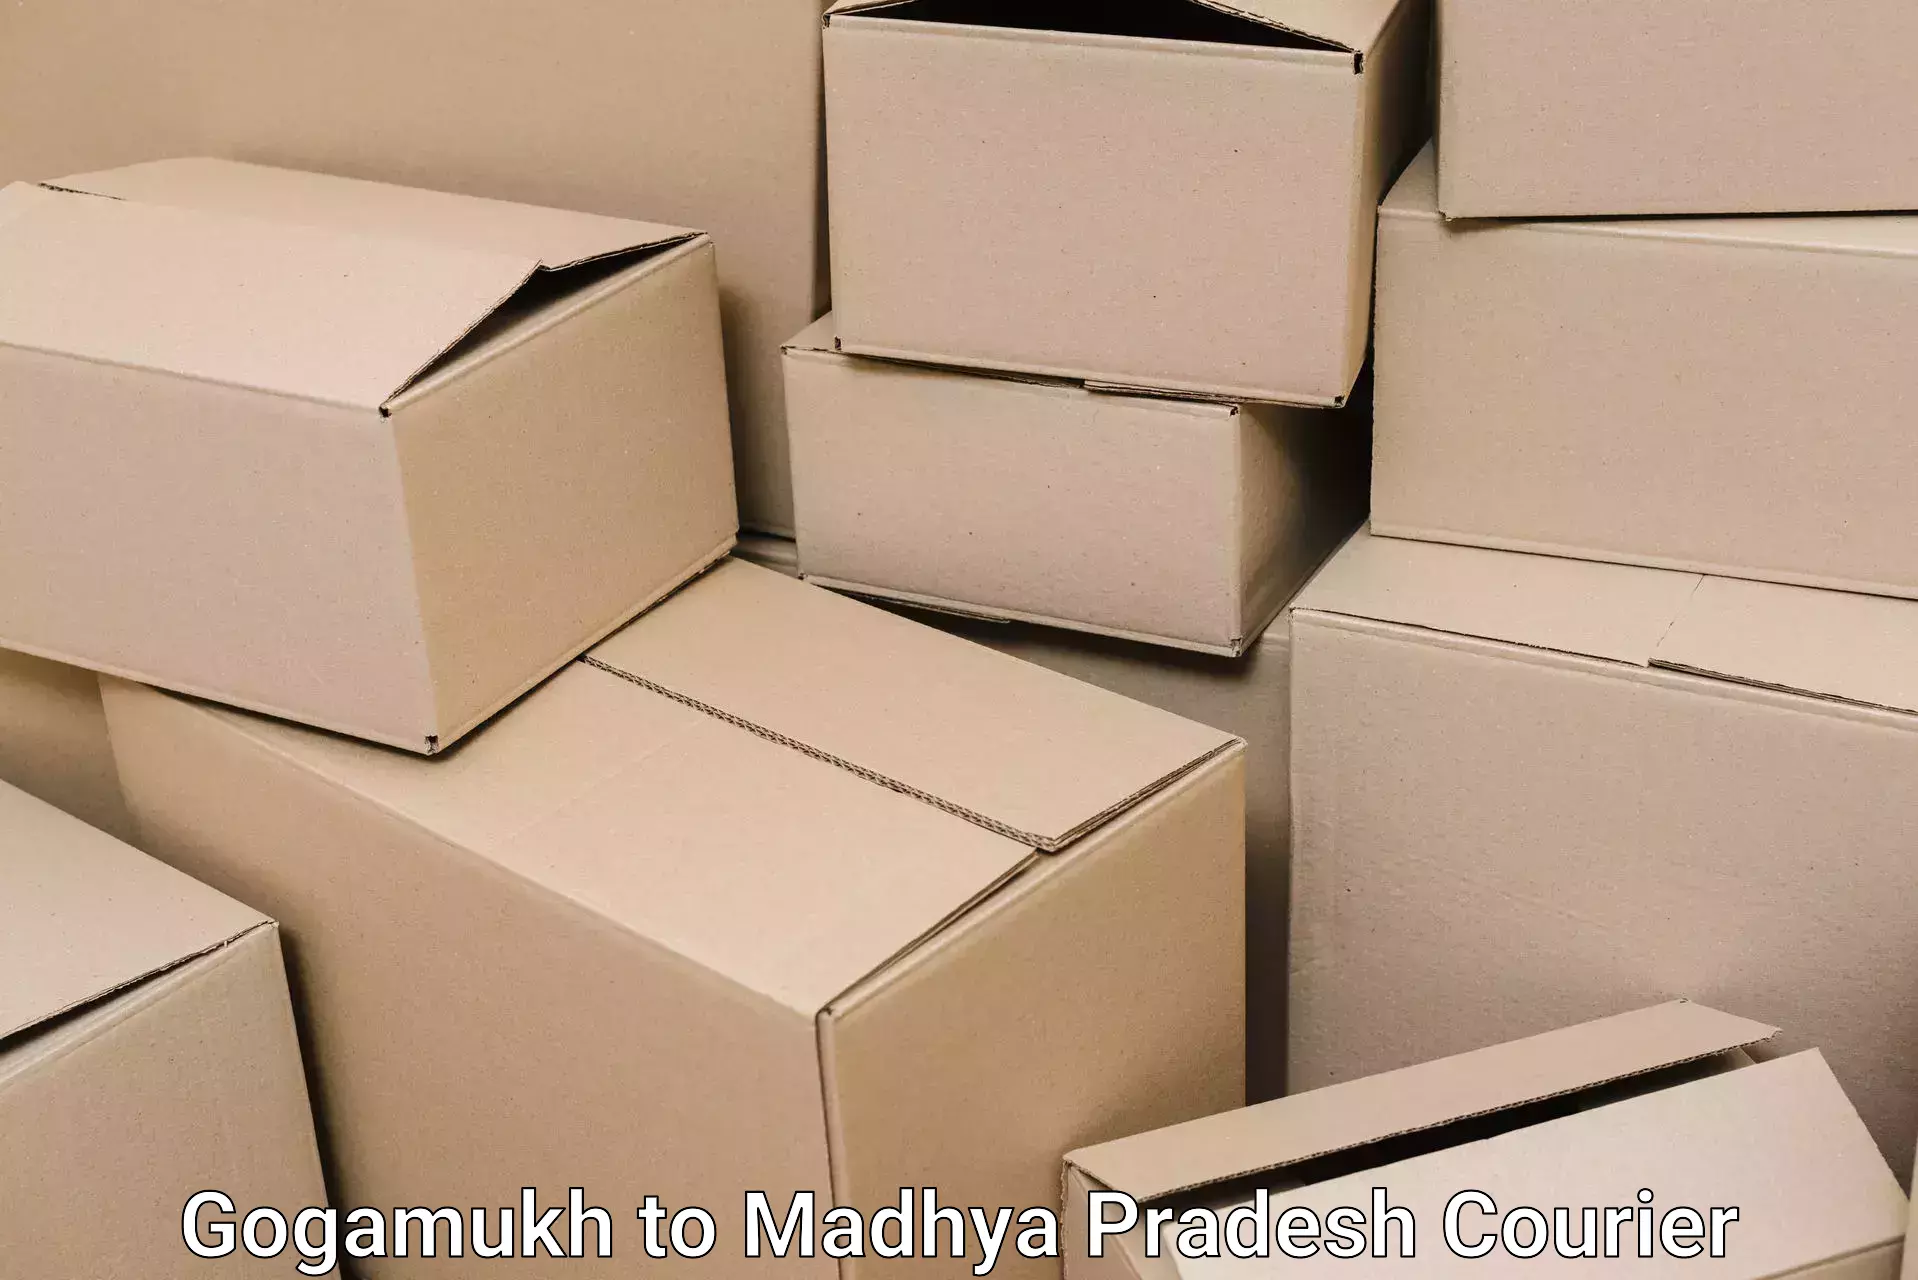 Quality moving and storage in Gogamukh to Gwalior